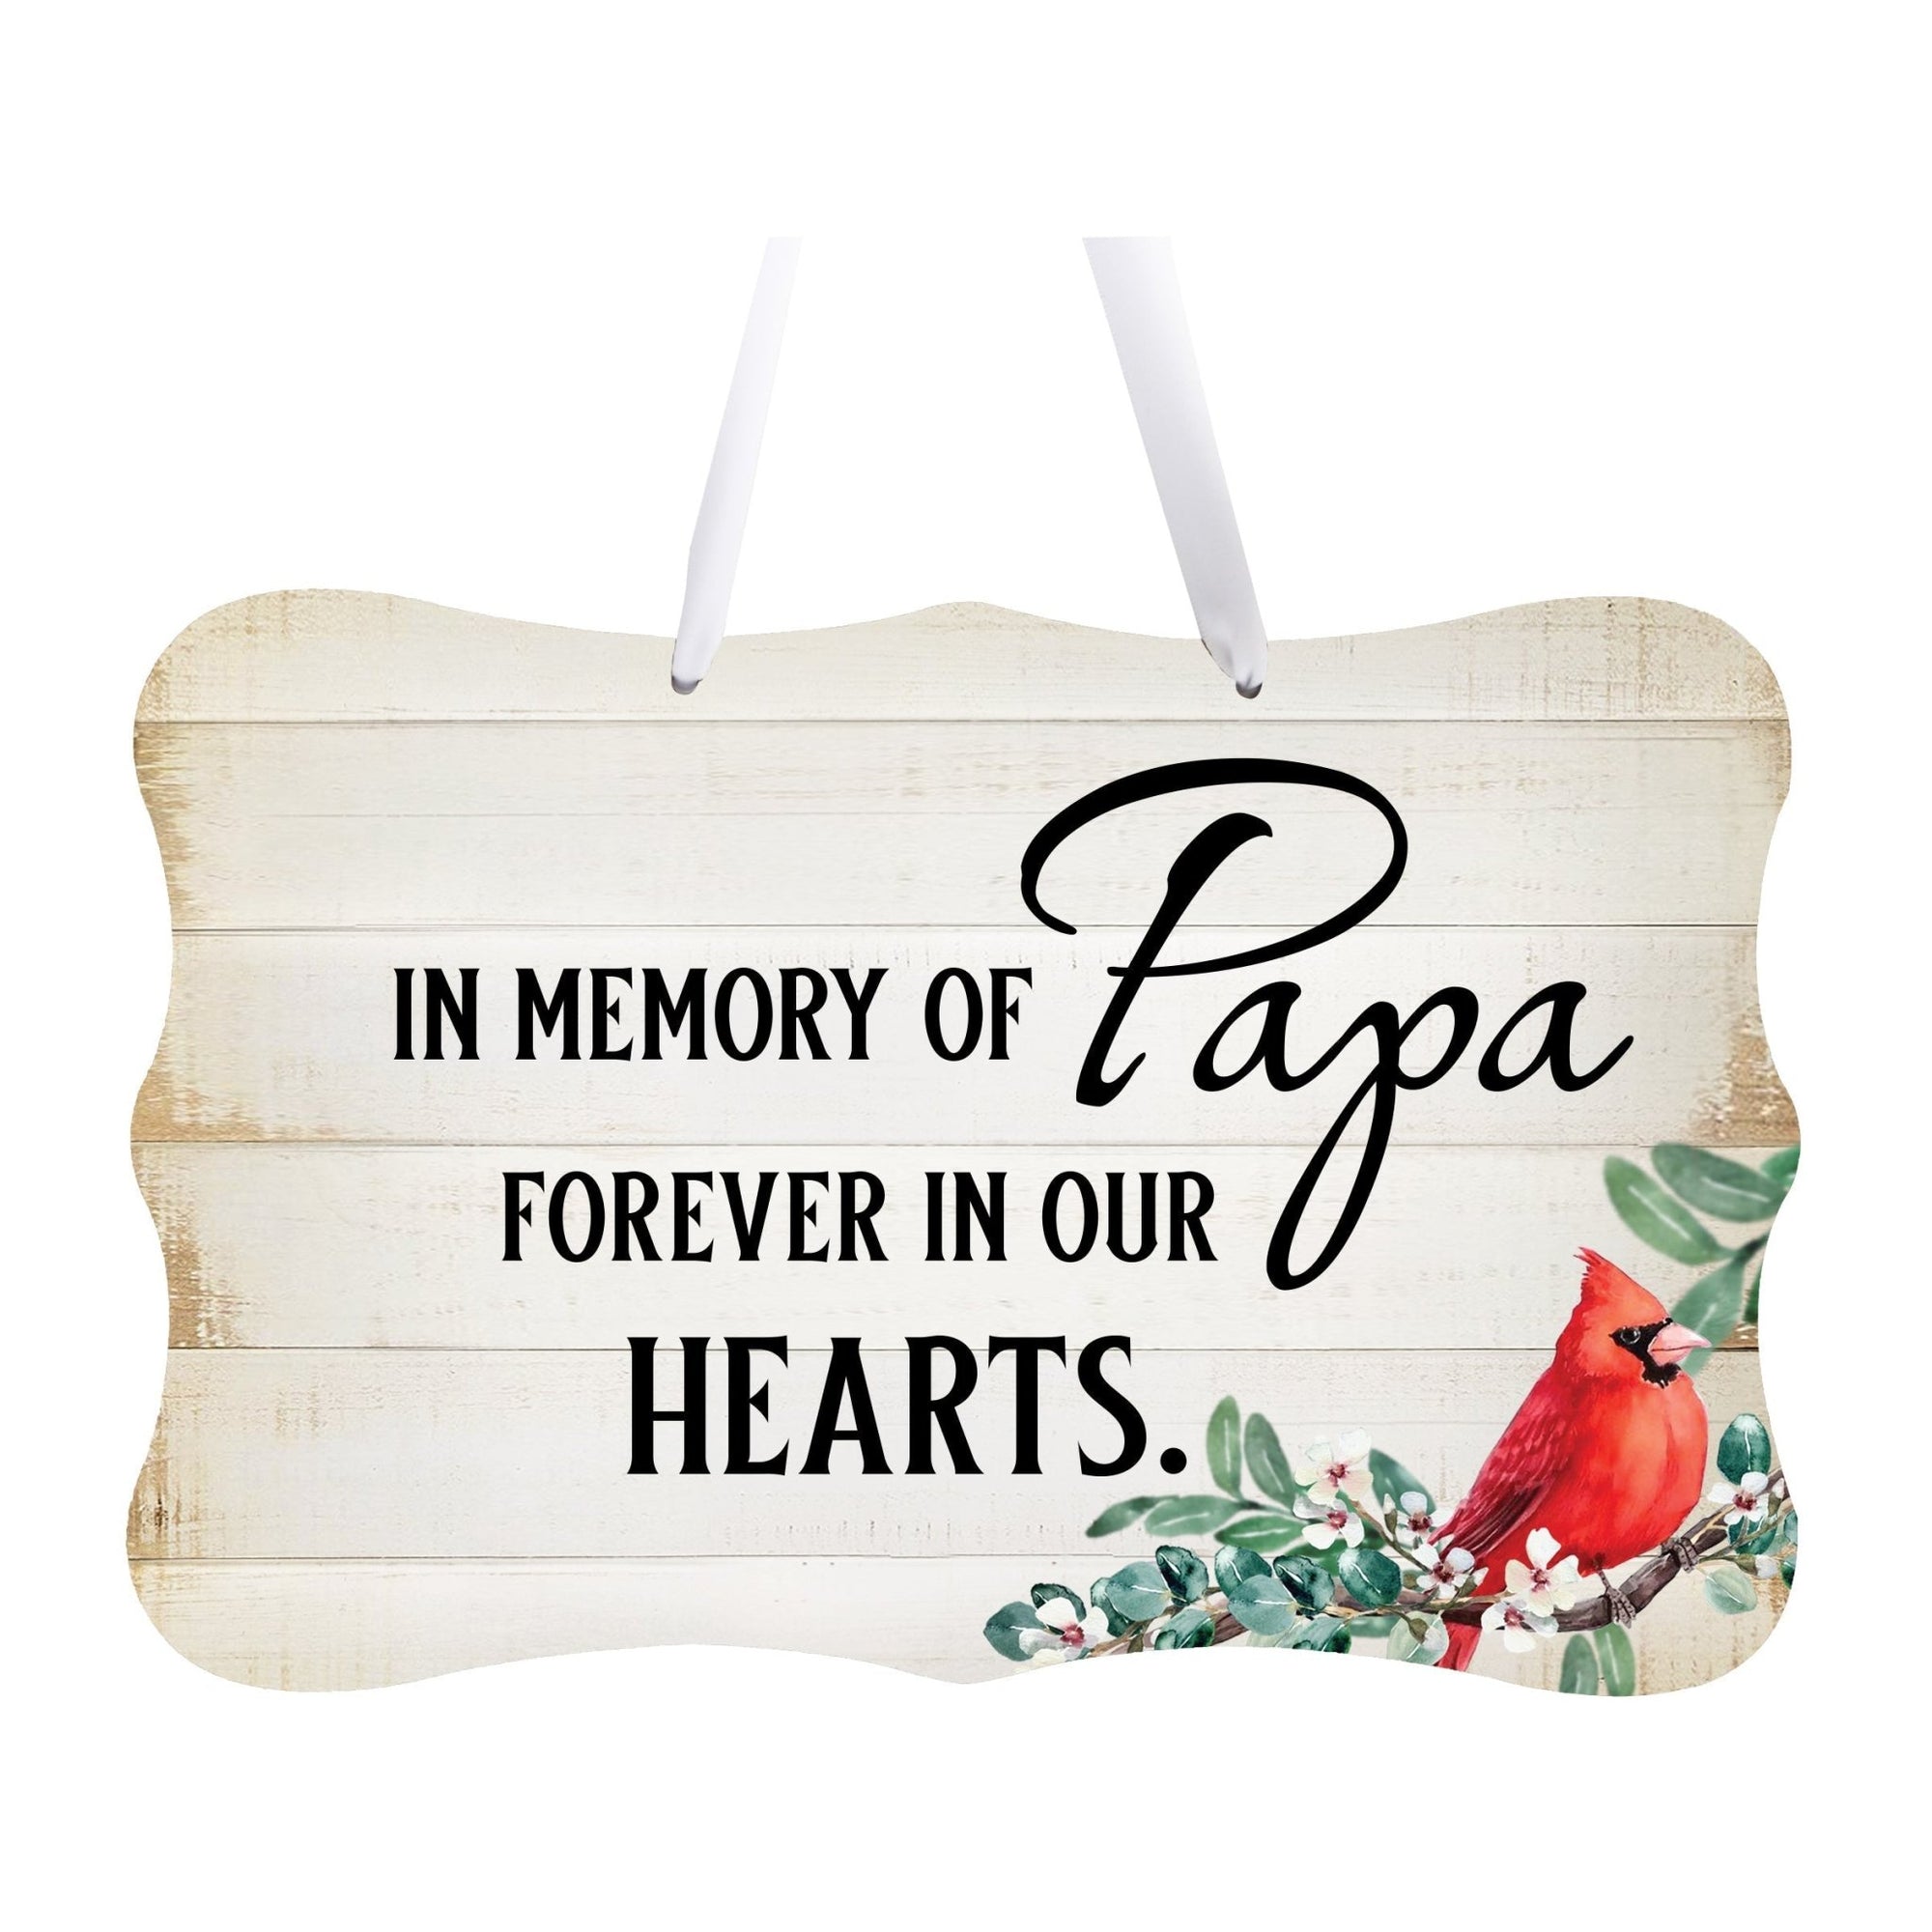 Memorial gifts for the loss of a loved one, including this elegant wall hanging sign, designed to offer comfort and support during difficult times.